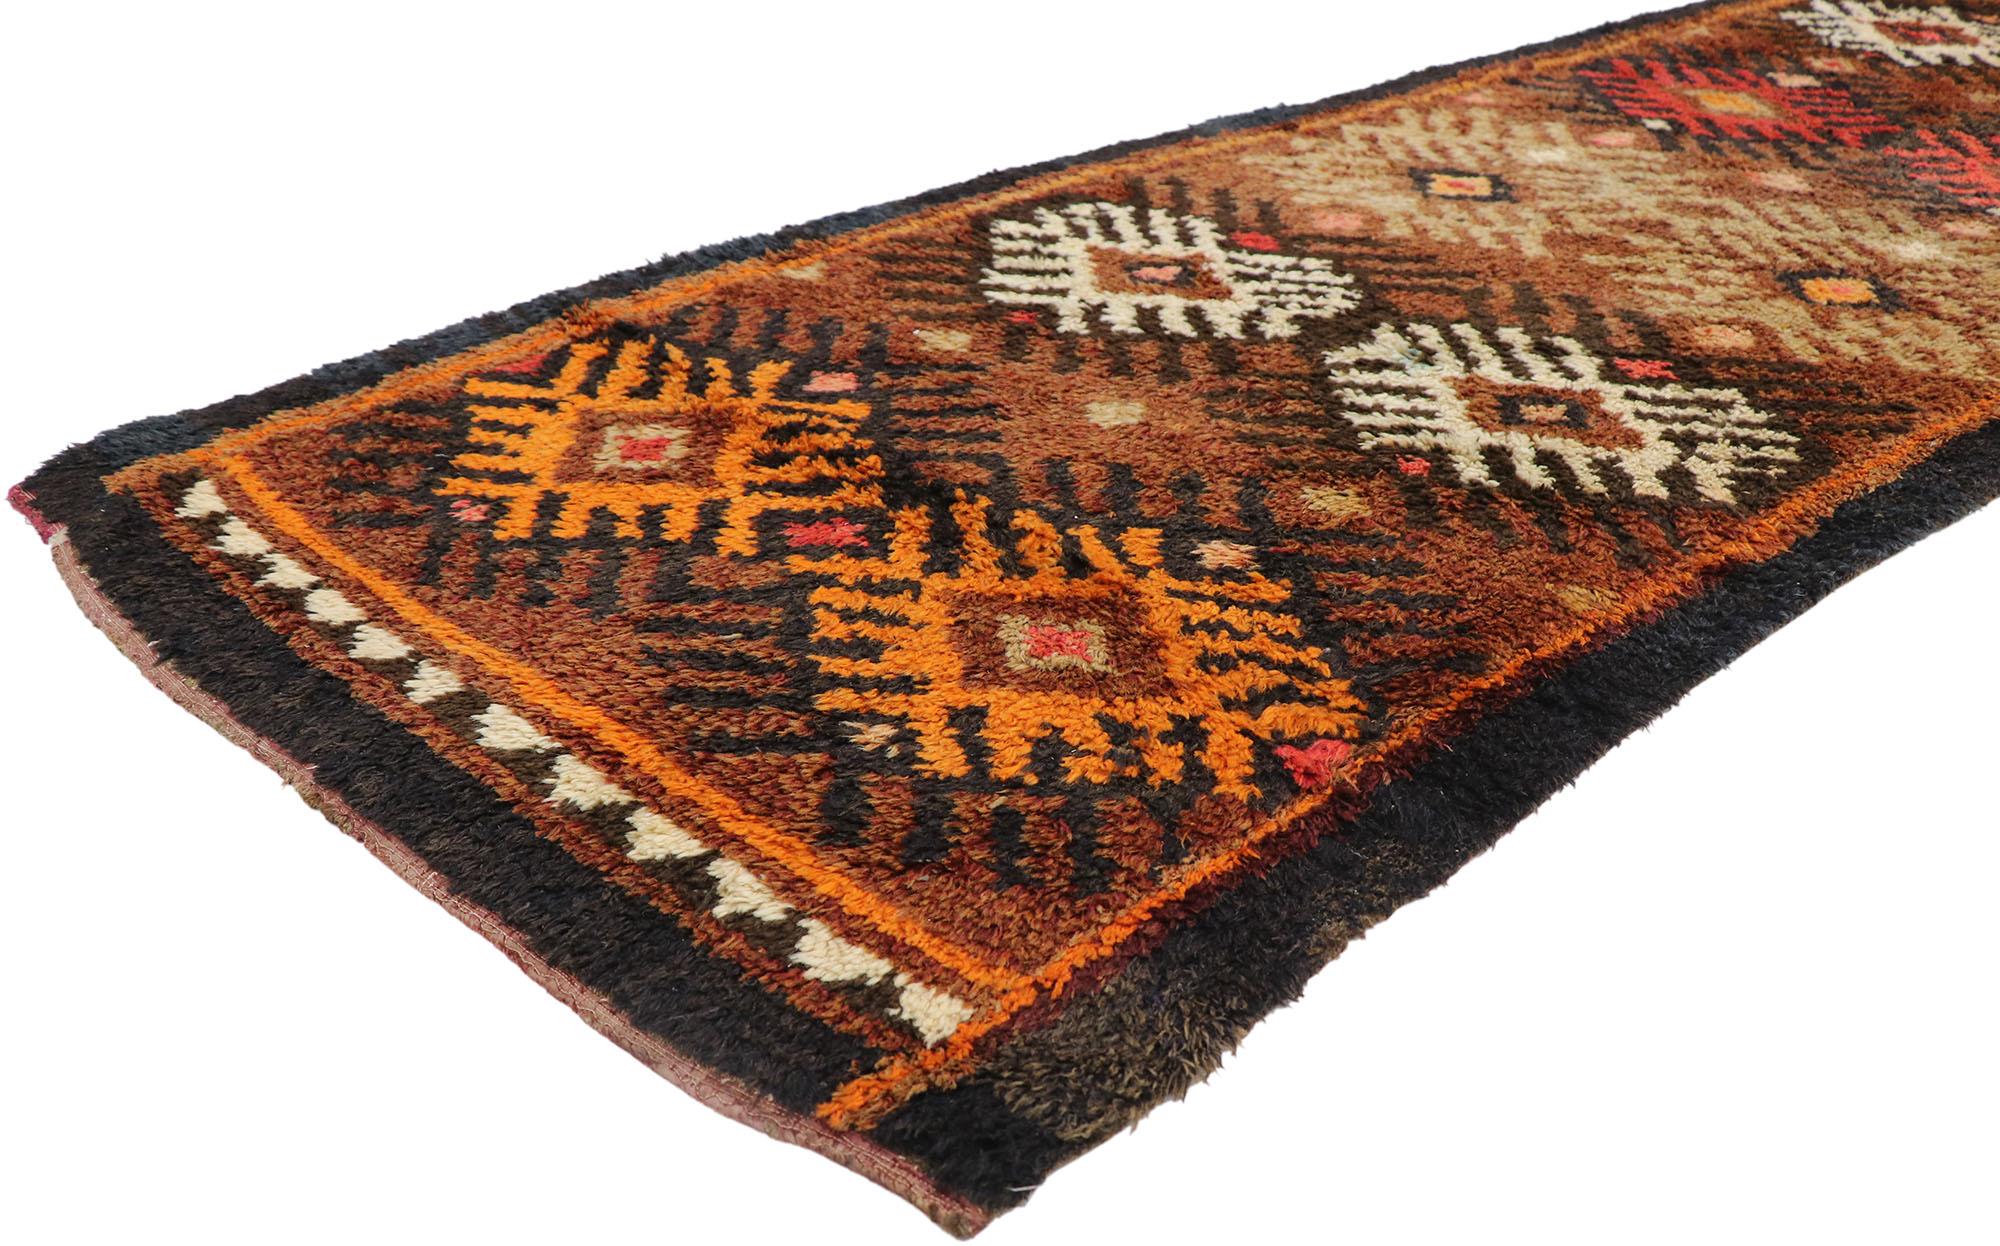 78073 antique Persian Gabbeh Runner with Mid-Century Modern Tribal style 03'02 x 10'09. With its warm hues and rugged beauty, this hand-knotted wool antique Persian Gabbeh runner beautifully embodies a Mid-Century Modern tribal style. The abrashed